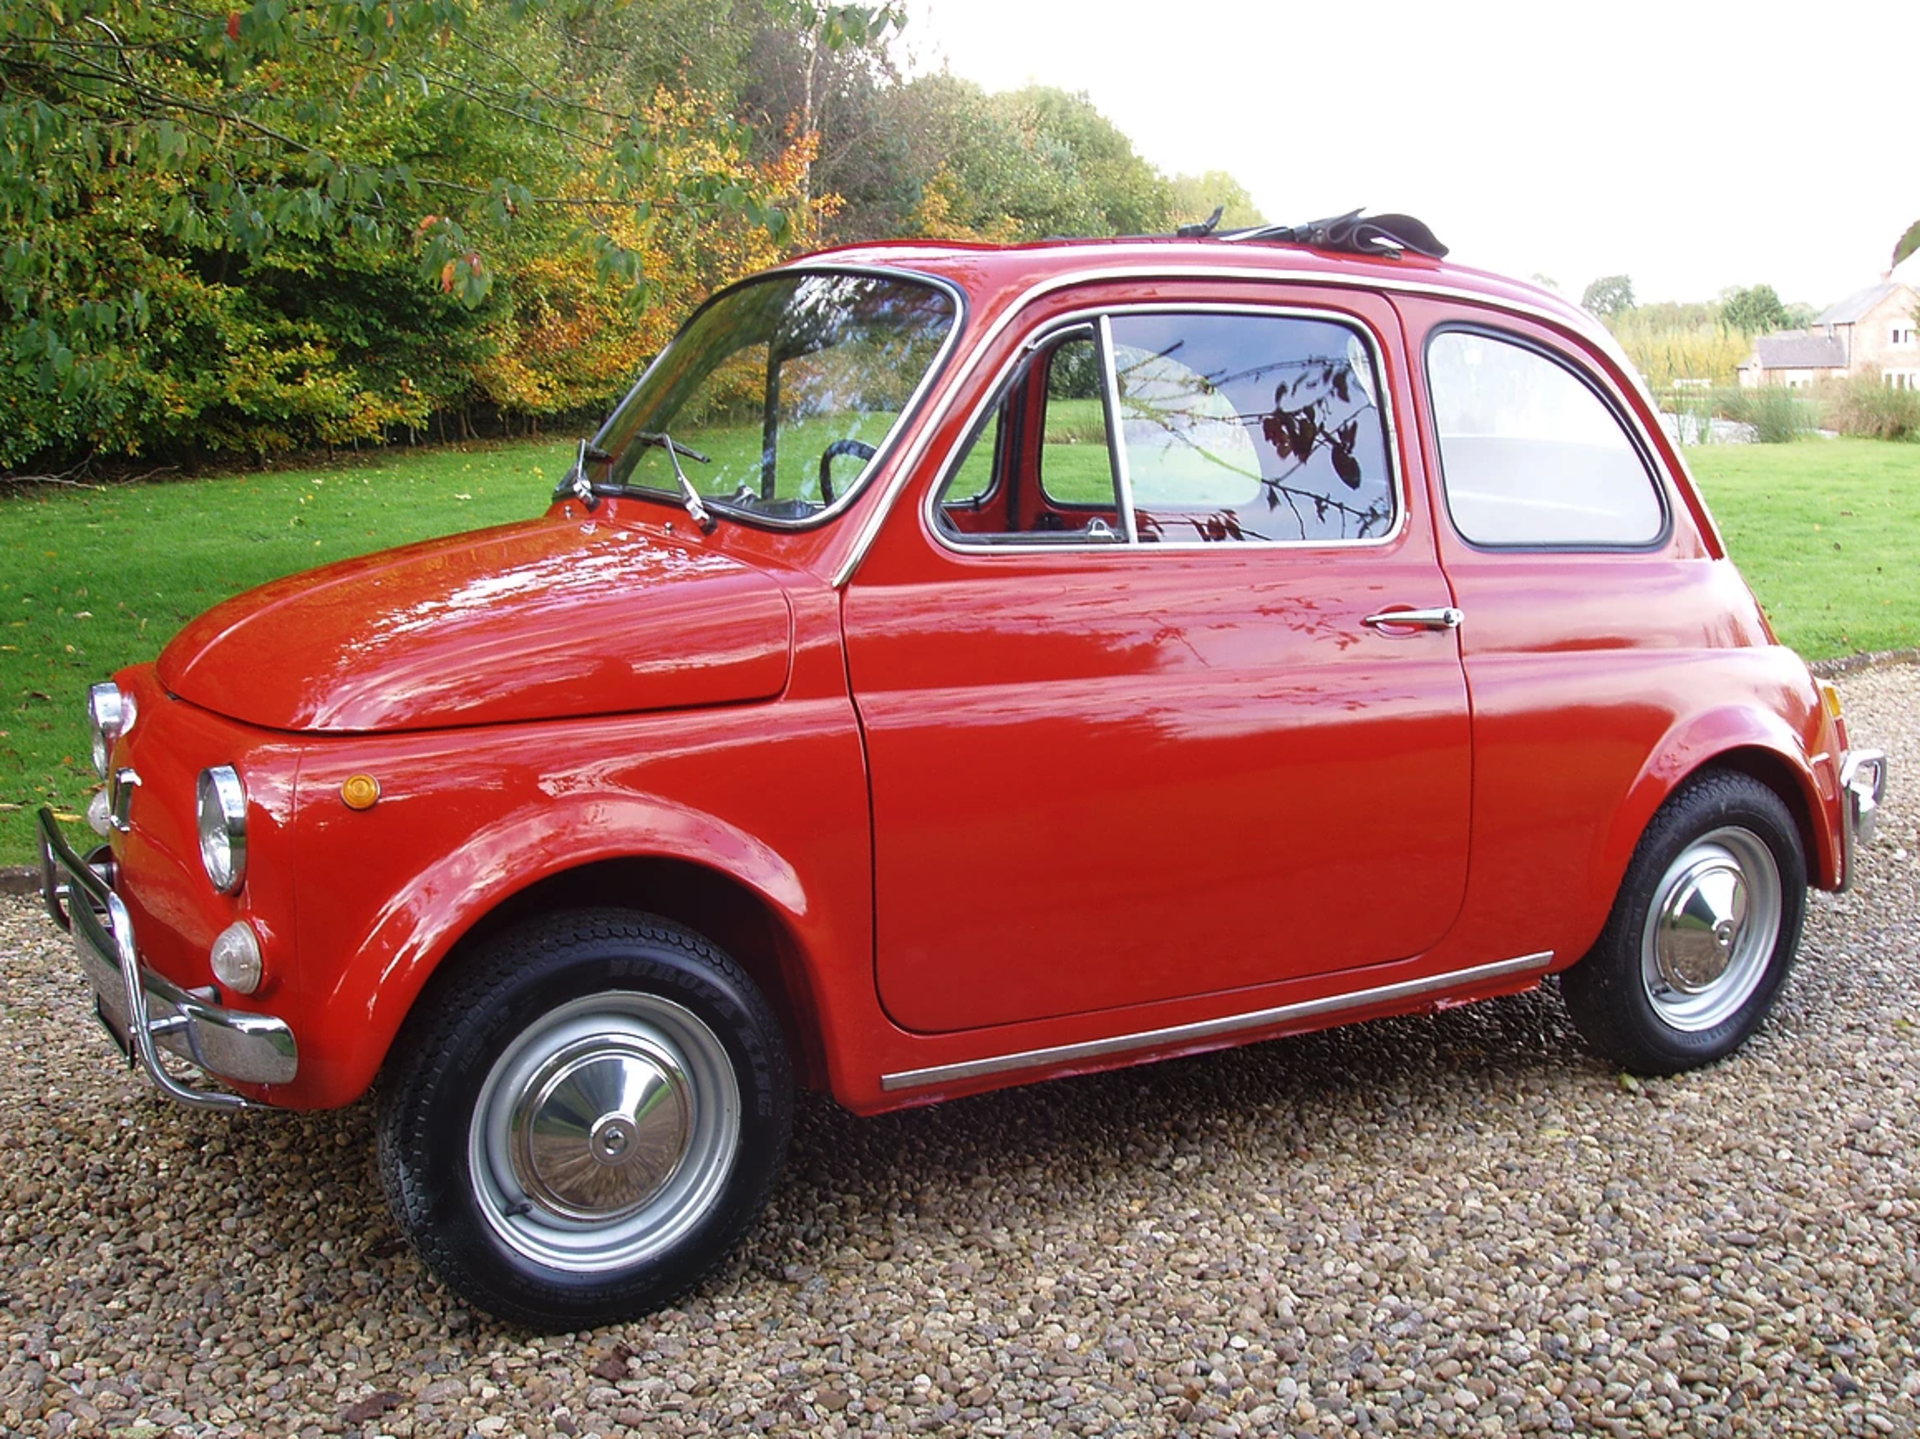 1970 Fiat 500 Lusso - Image 2 of 14